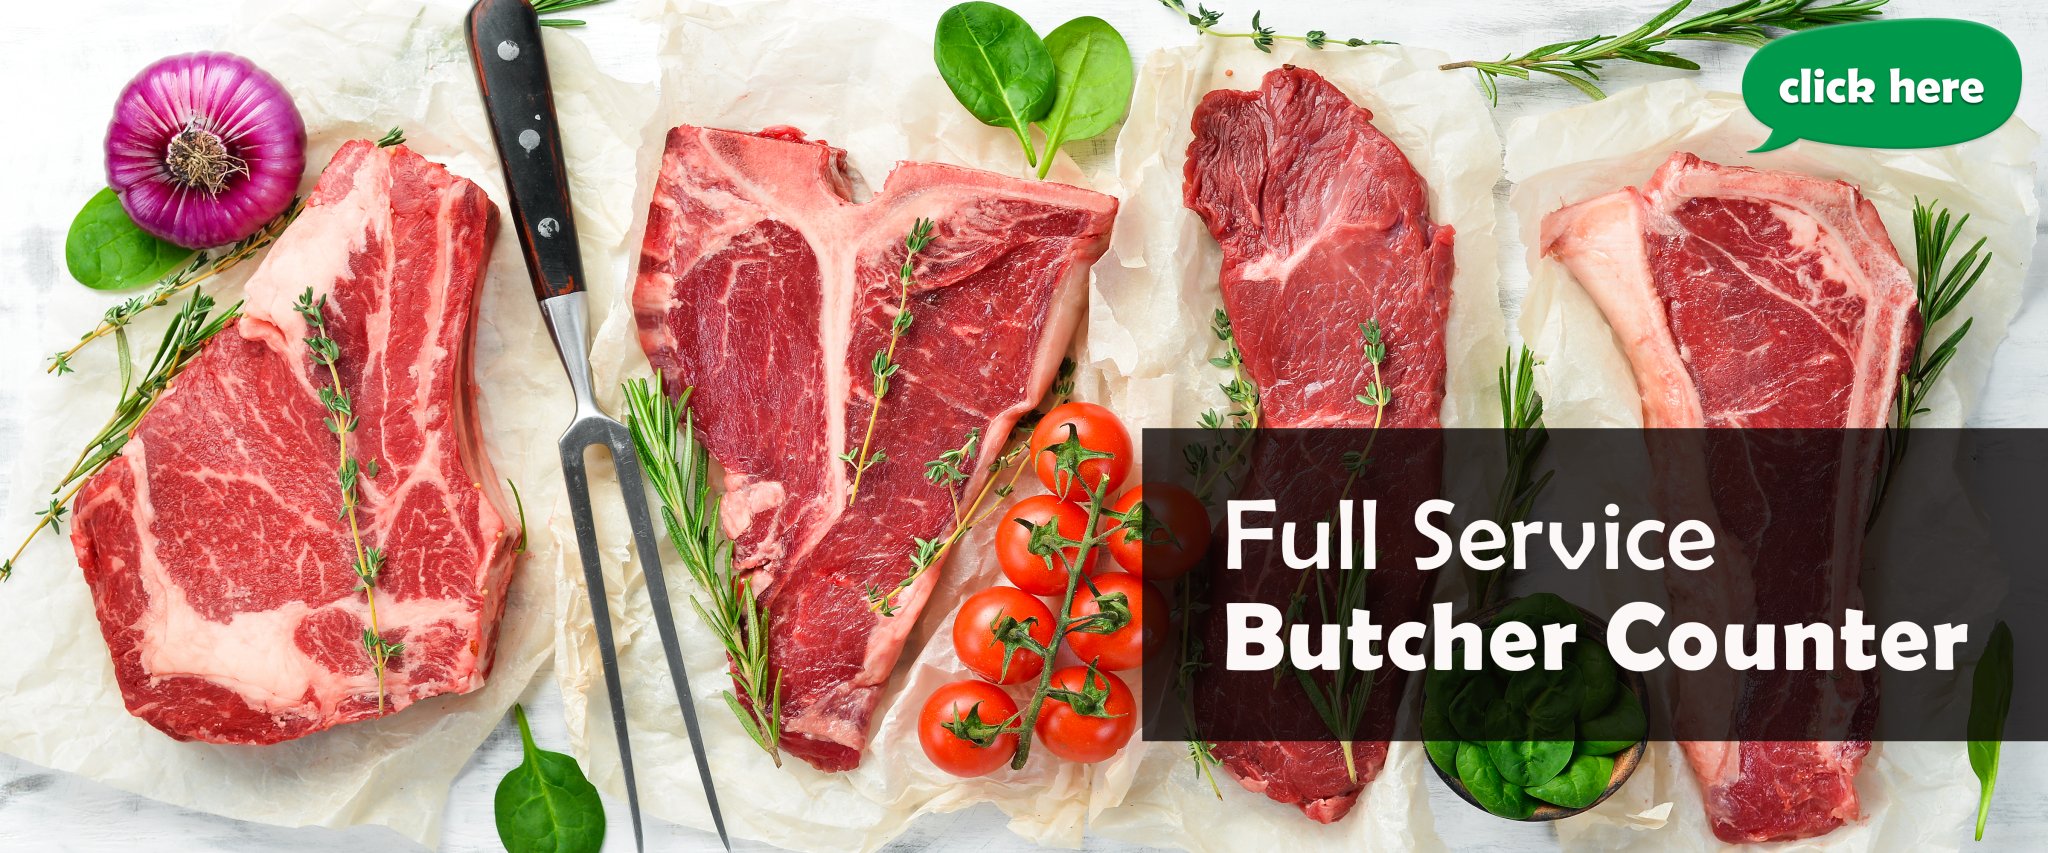 Full Service Butcher Counter! Click here to start shopping.